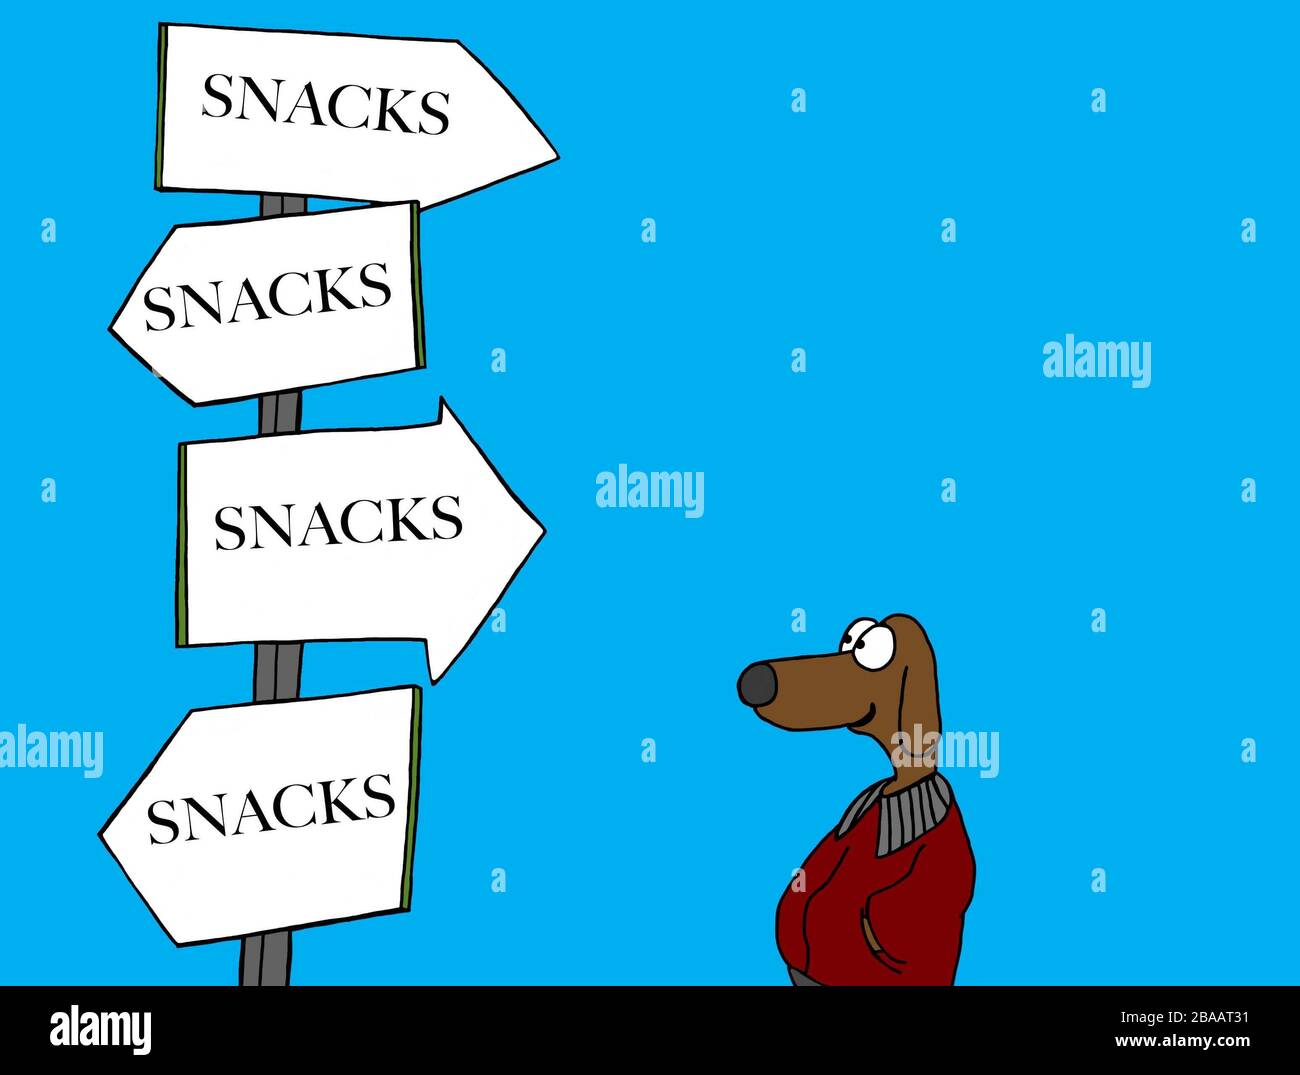 Color cartoon depicting a dog tempted by many snack opportunities. Stock Photo